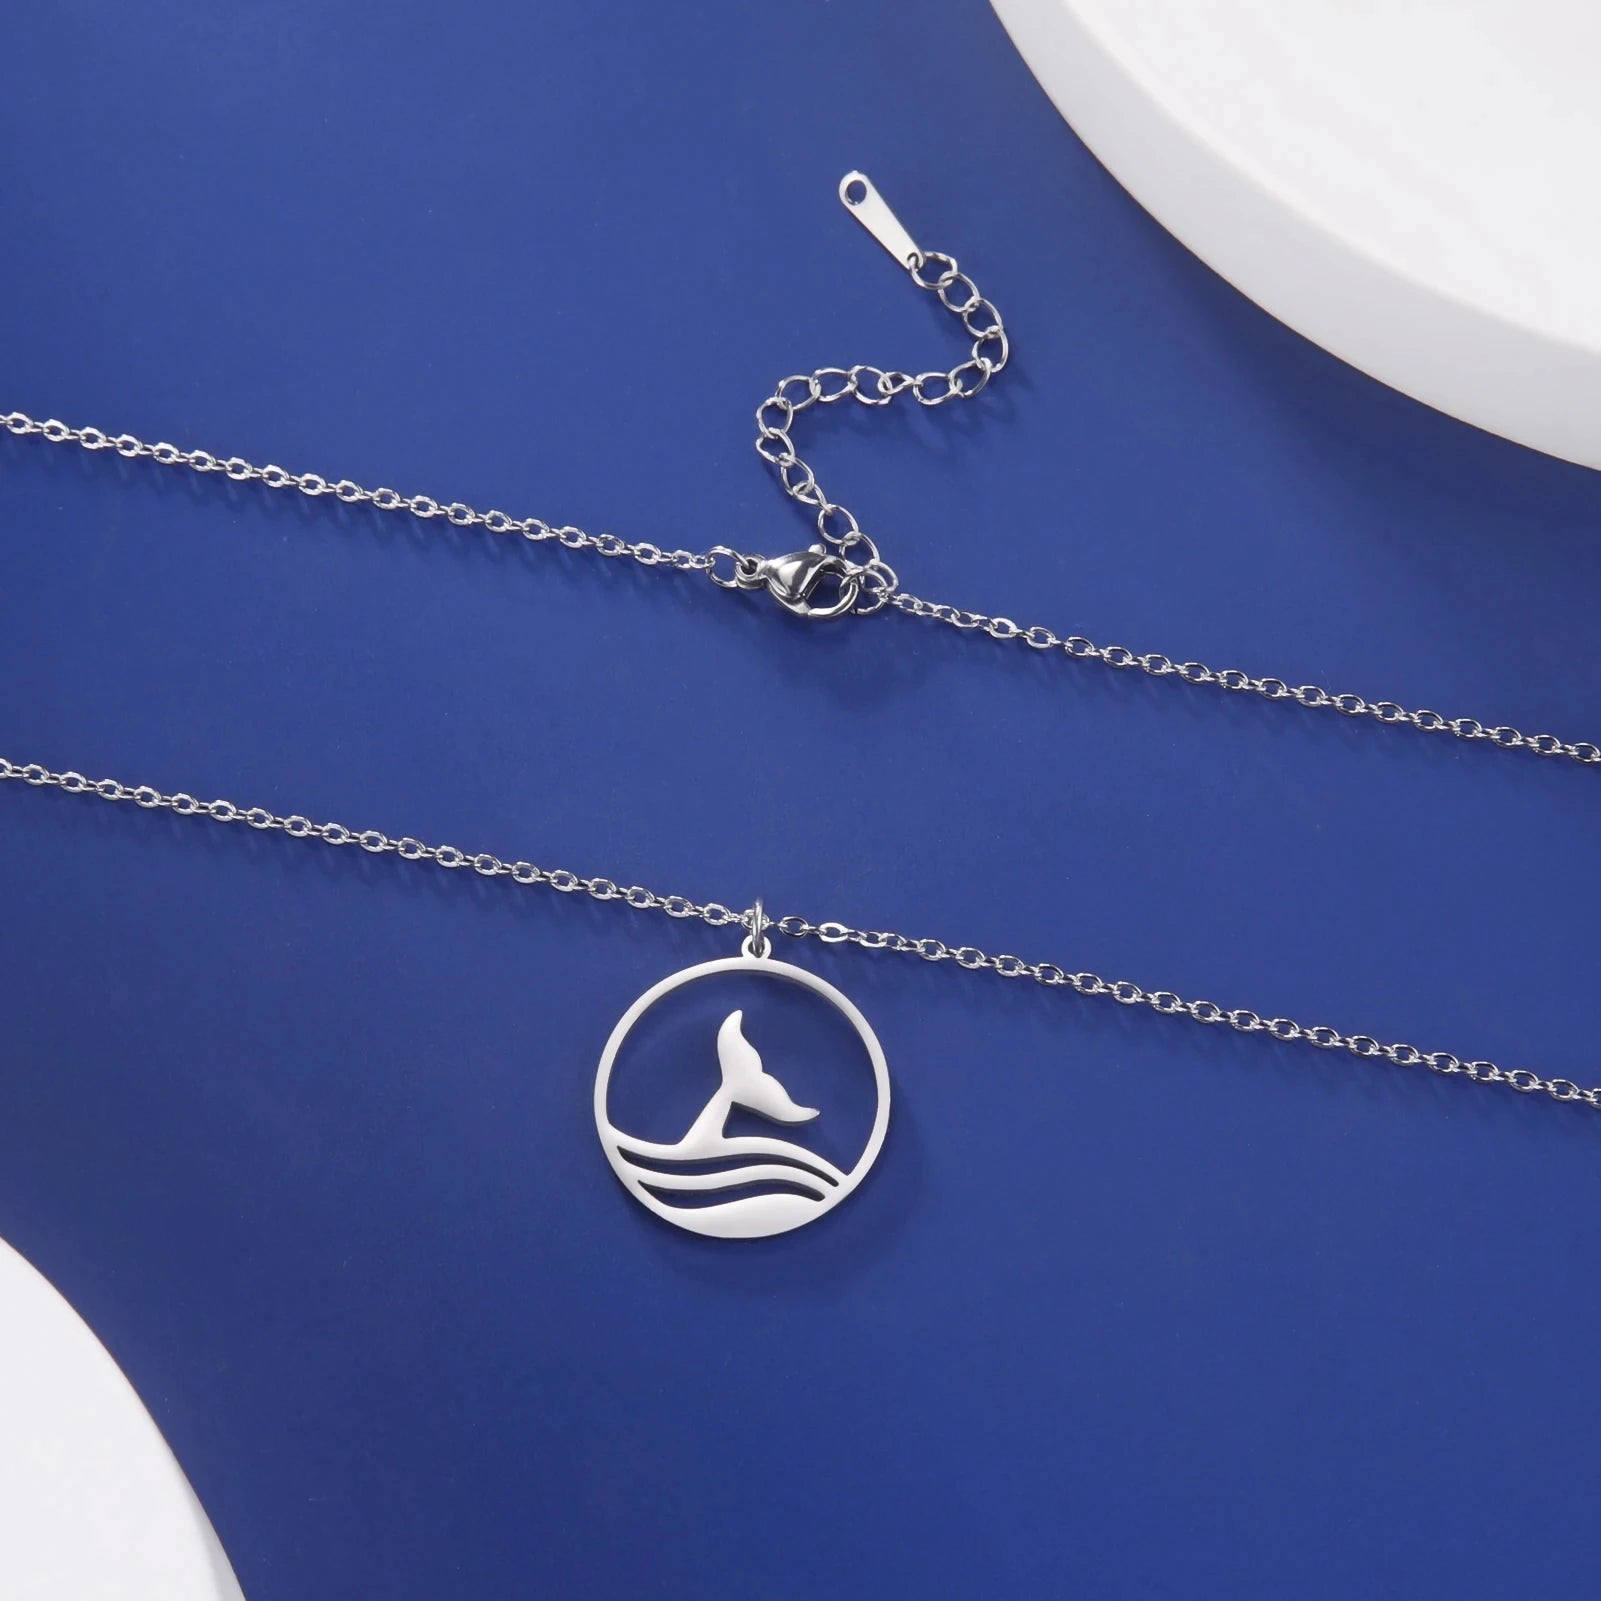 Sea Wave Stainless Steel Pendant Necklace - Madeinsea©